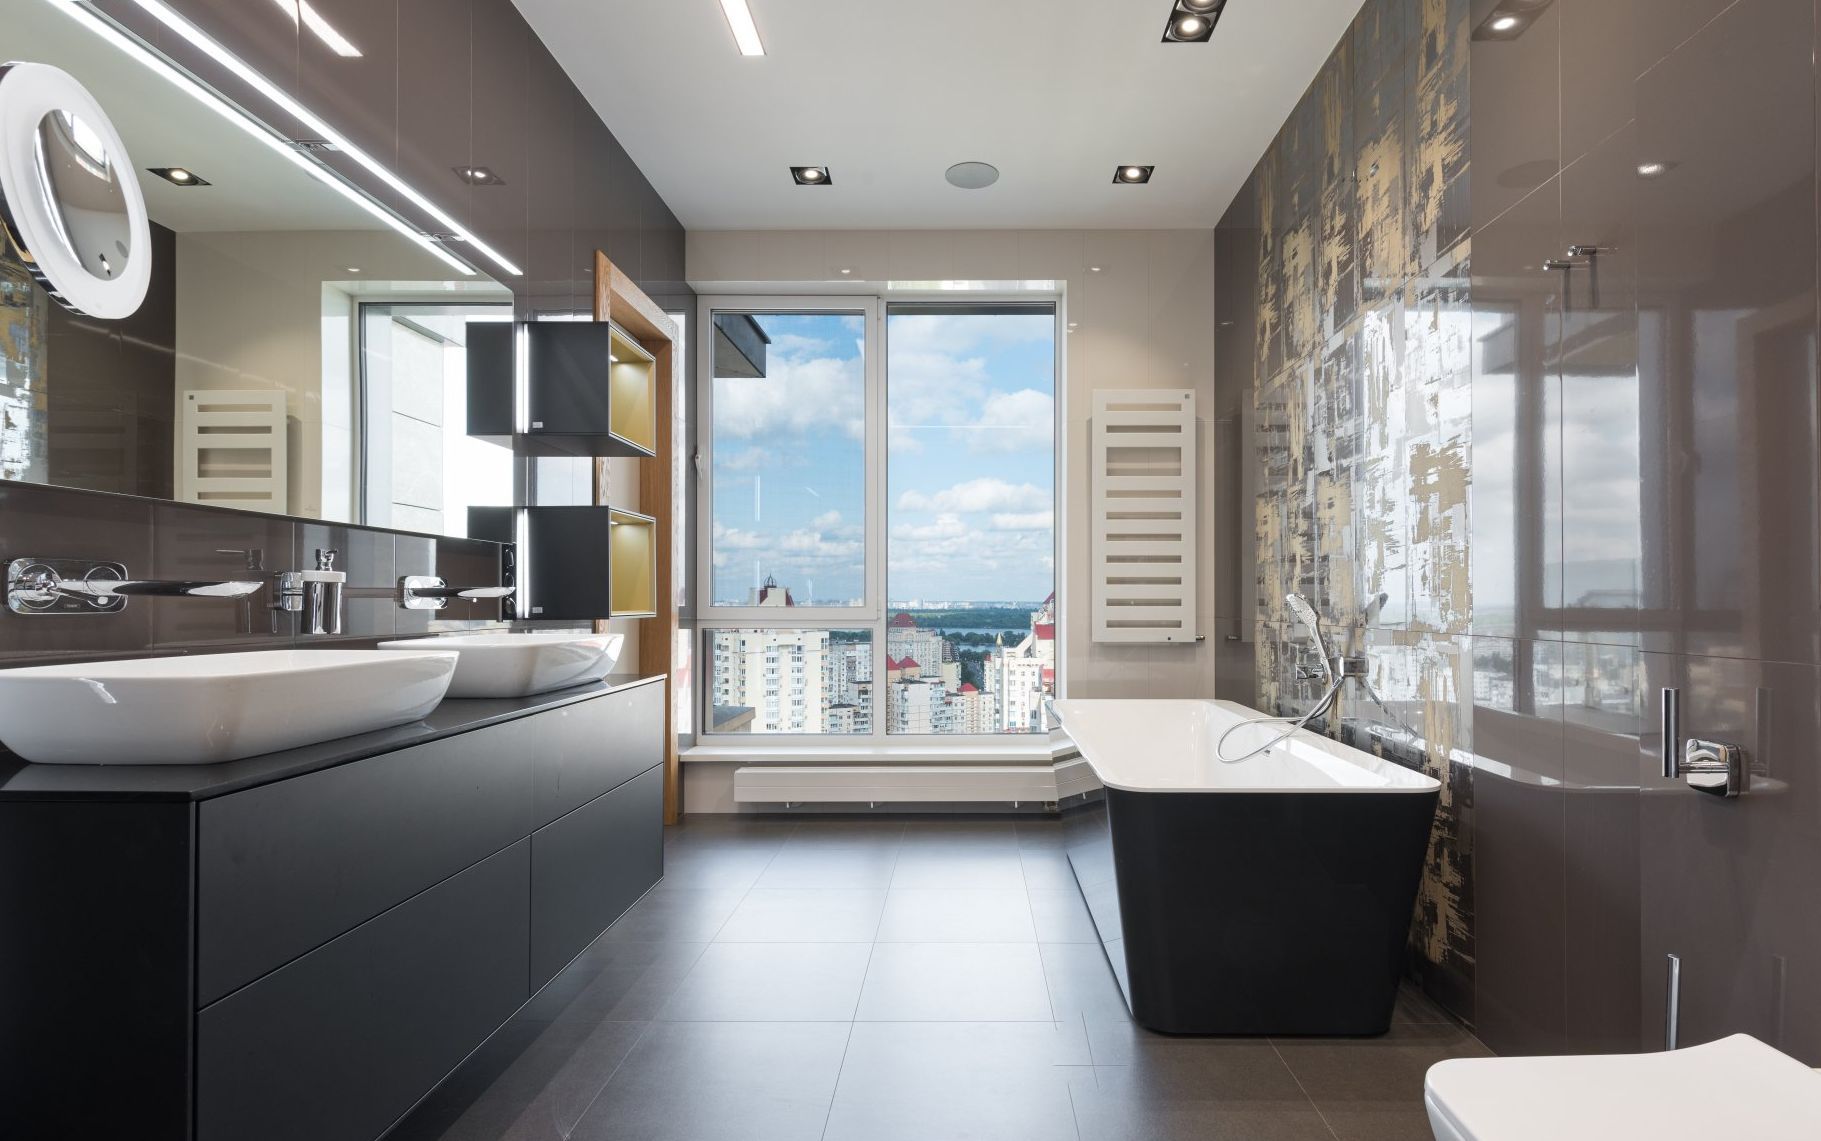 picture of a well-designed bathroom with a window view of the city